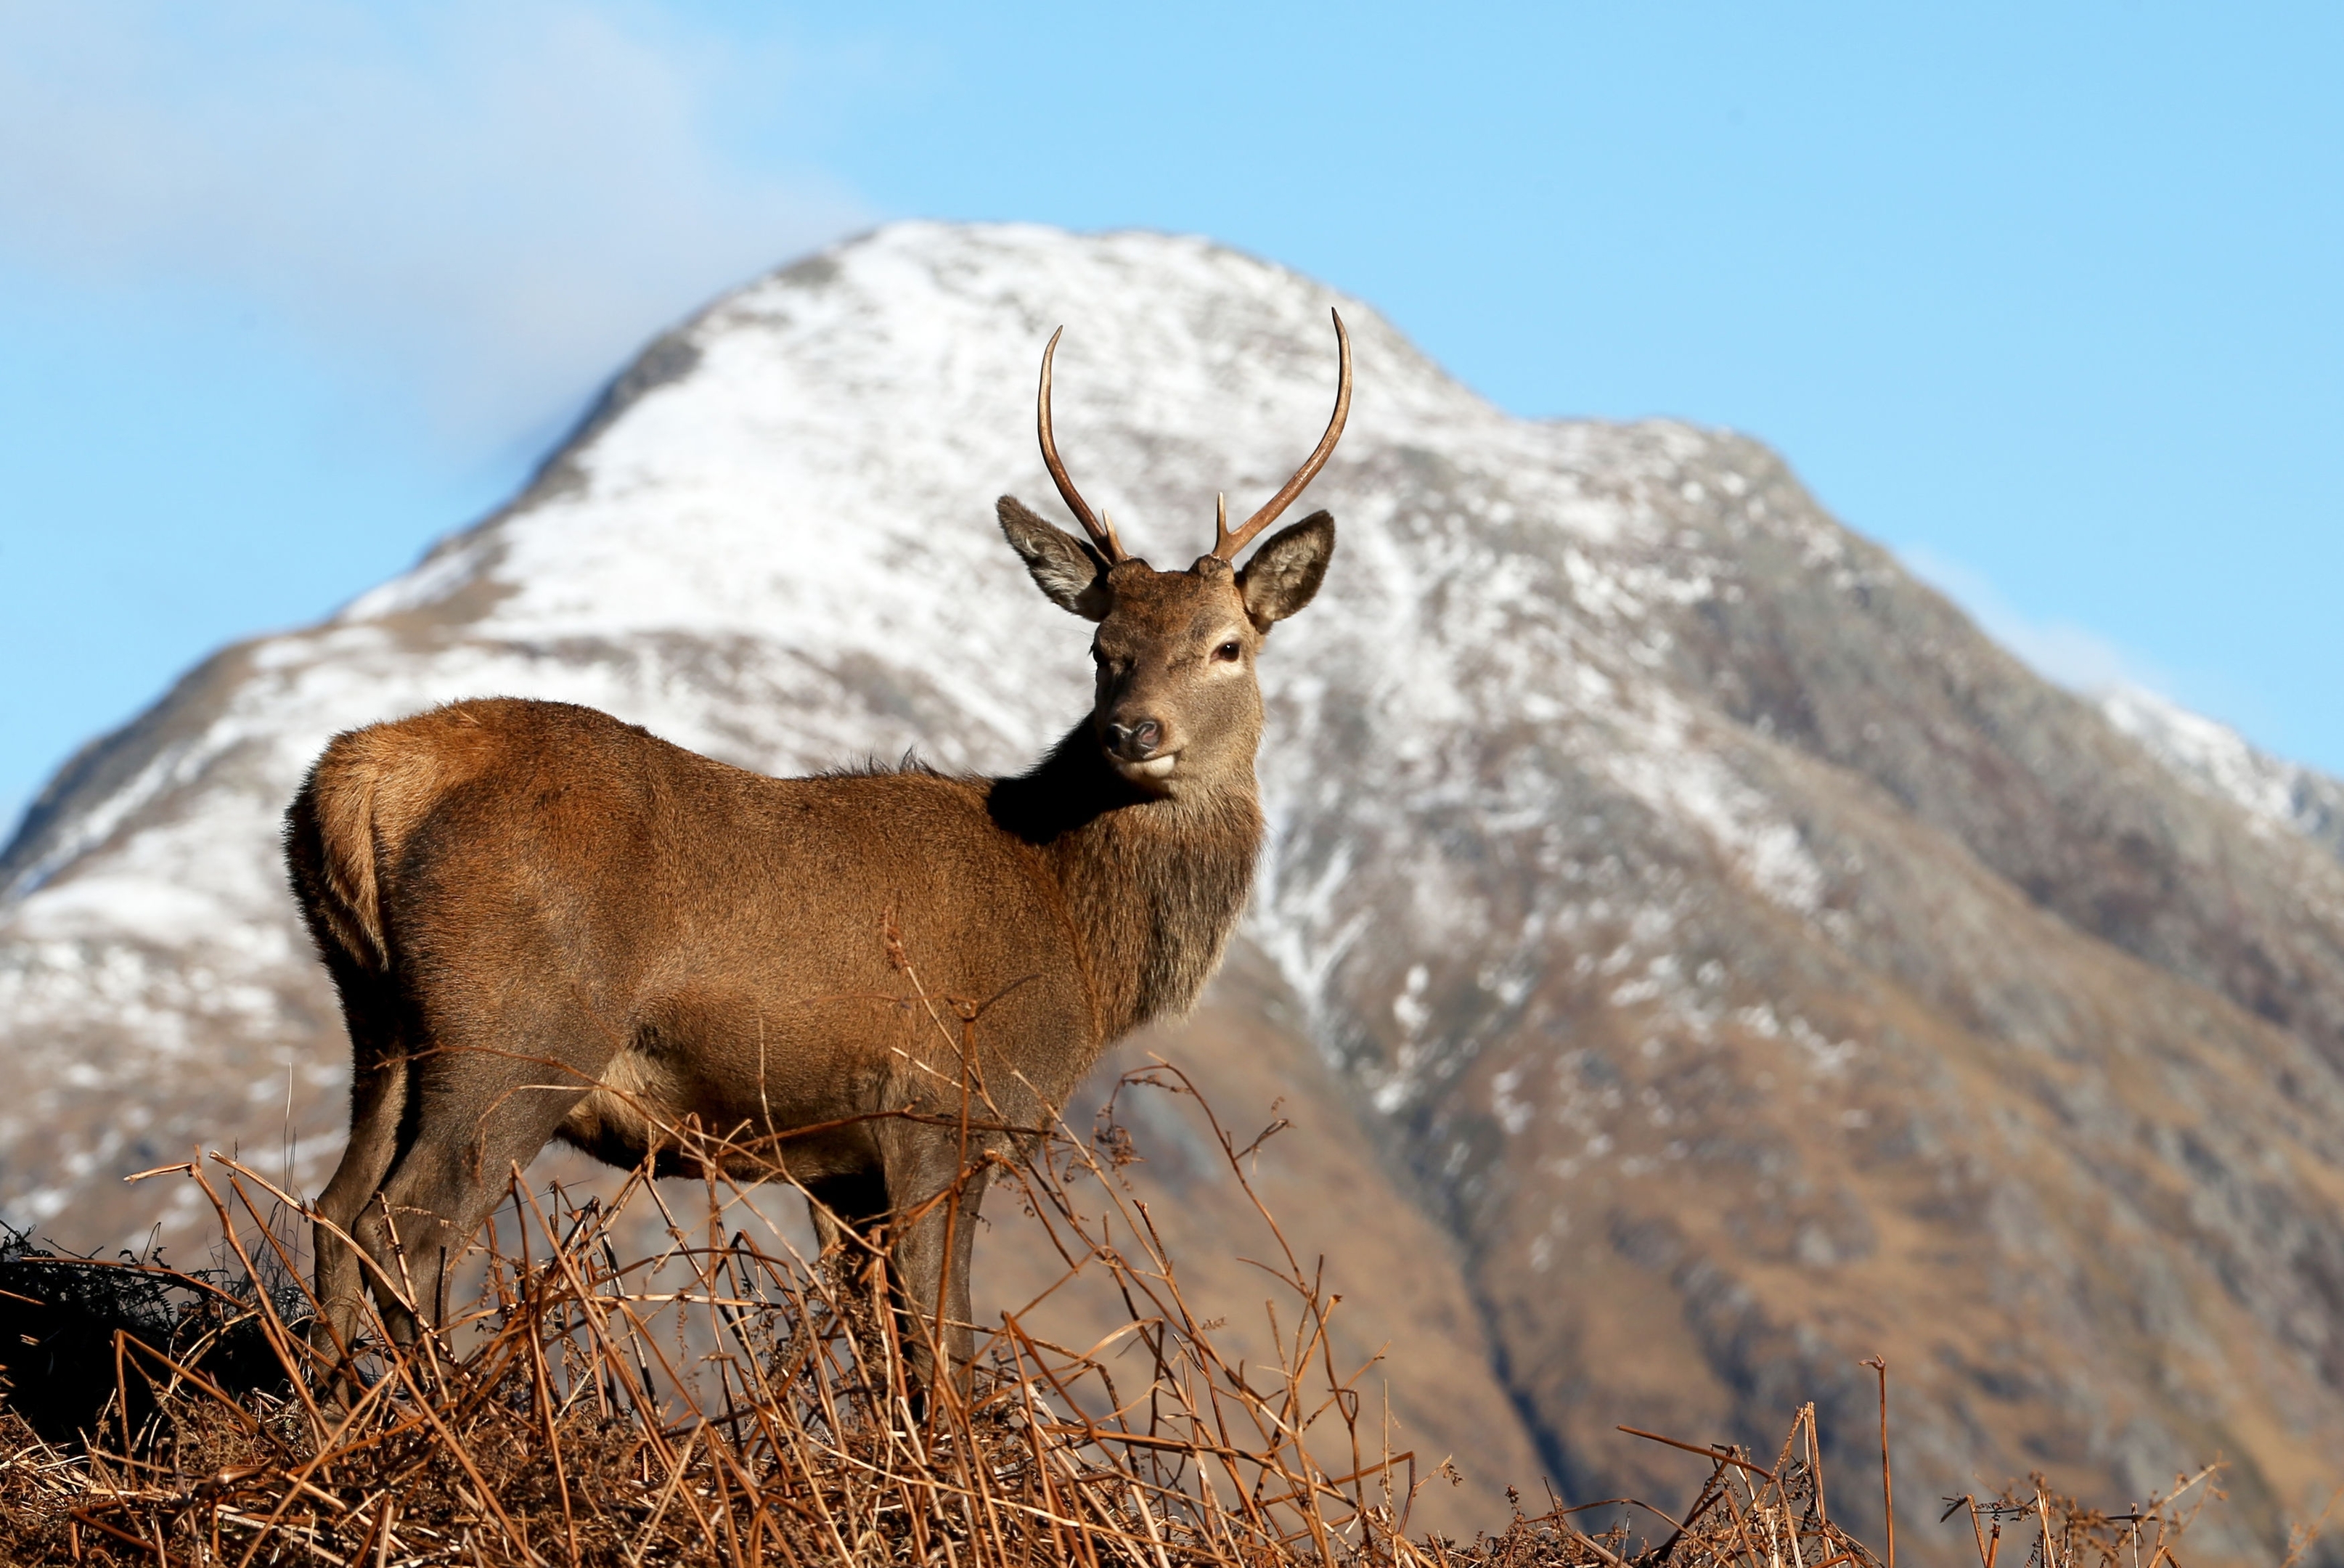 Red deer graze in Glen Etive in the Scottish Highlands, following the end of the rutting season.